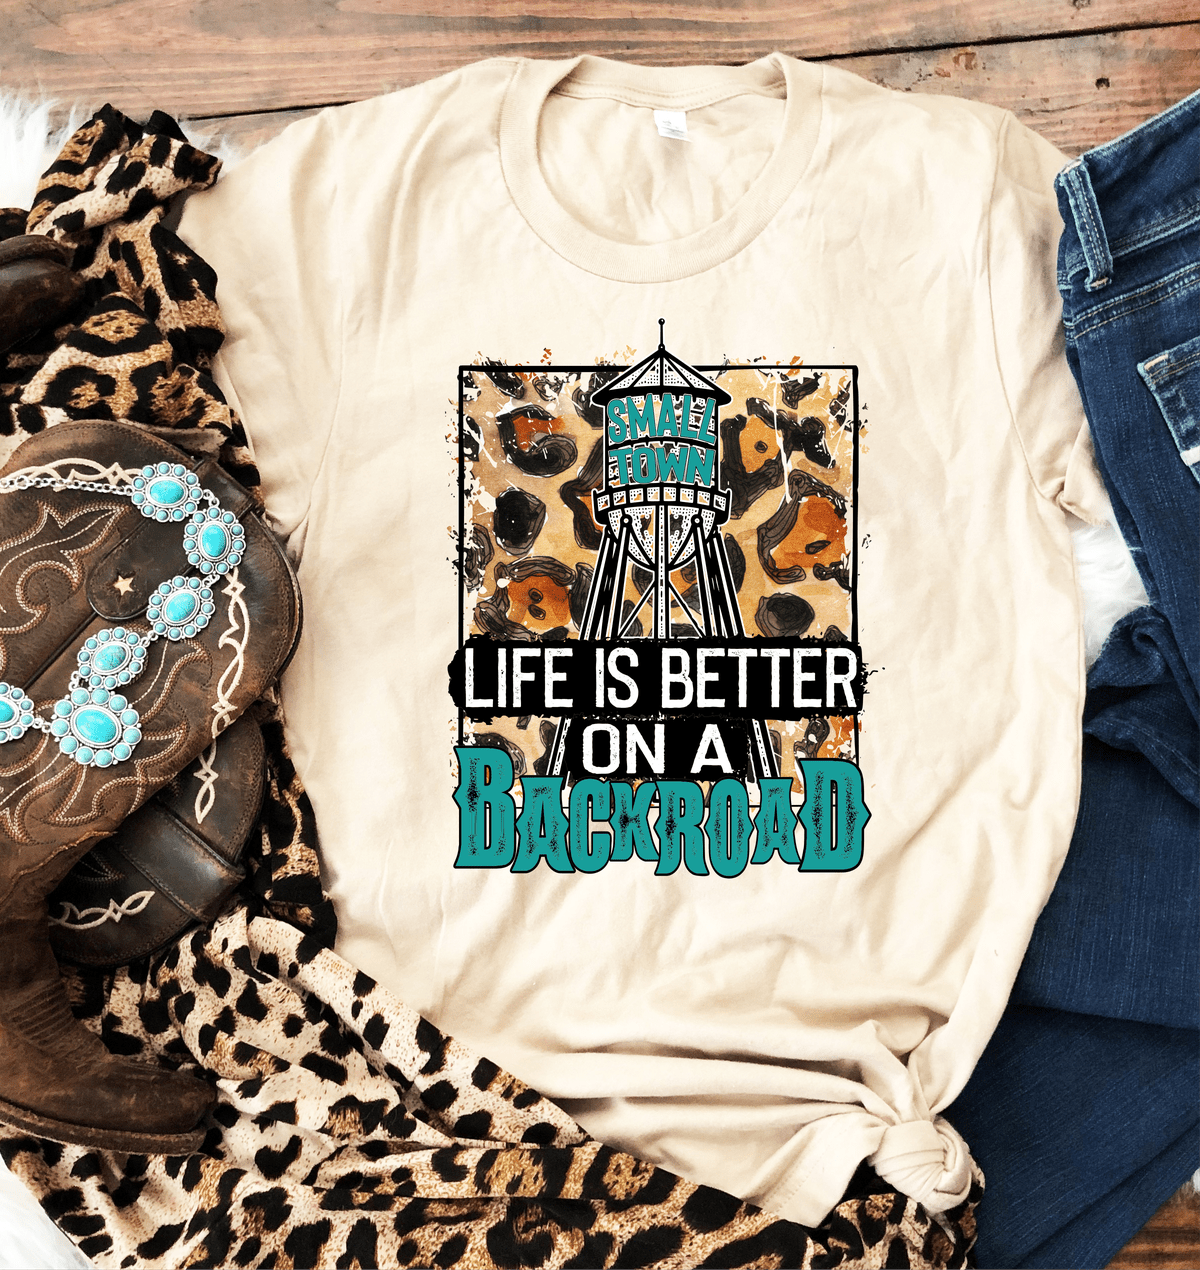 Life is better on a Backroad Small town Adult size DTF TRANSFERPRINT TO ORDER - Do it yourself Transfers